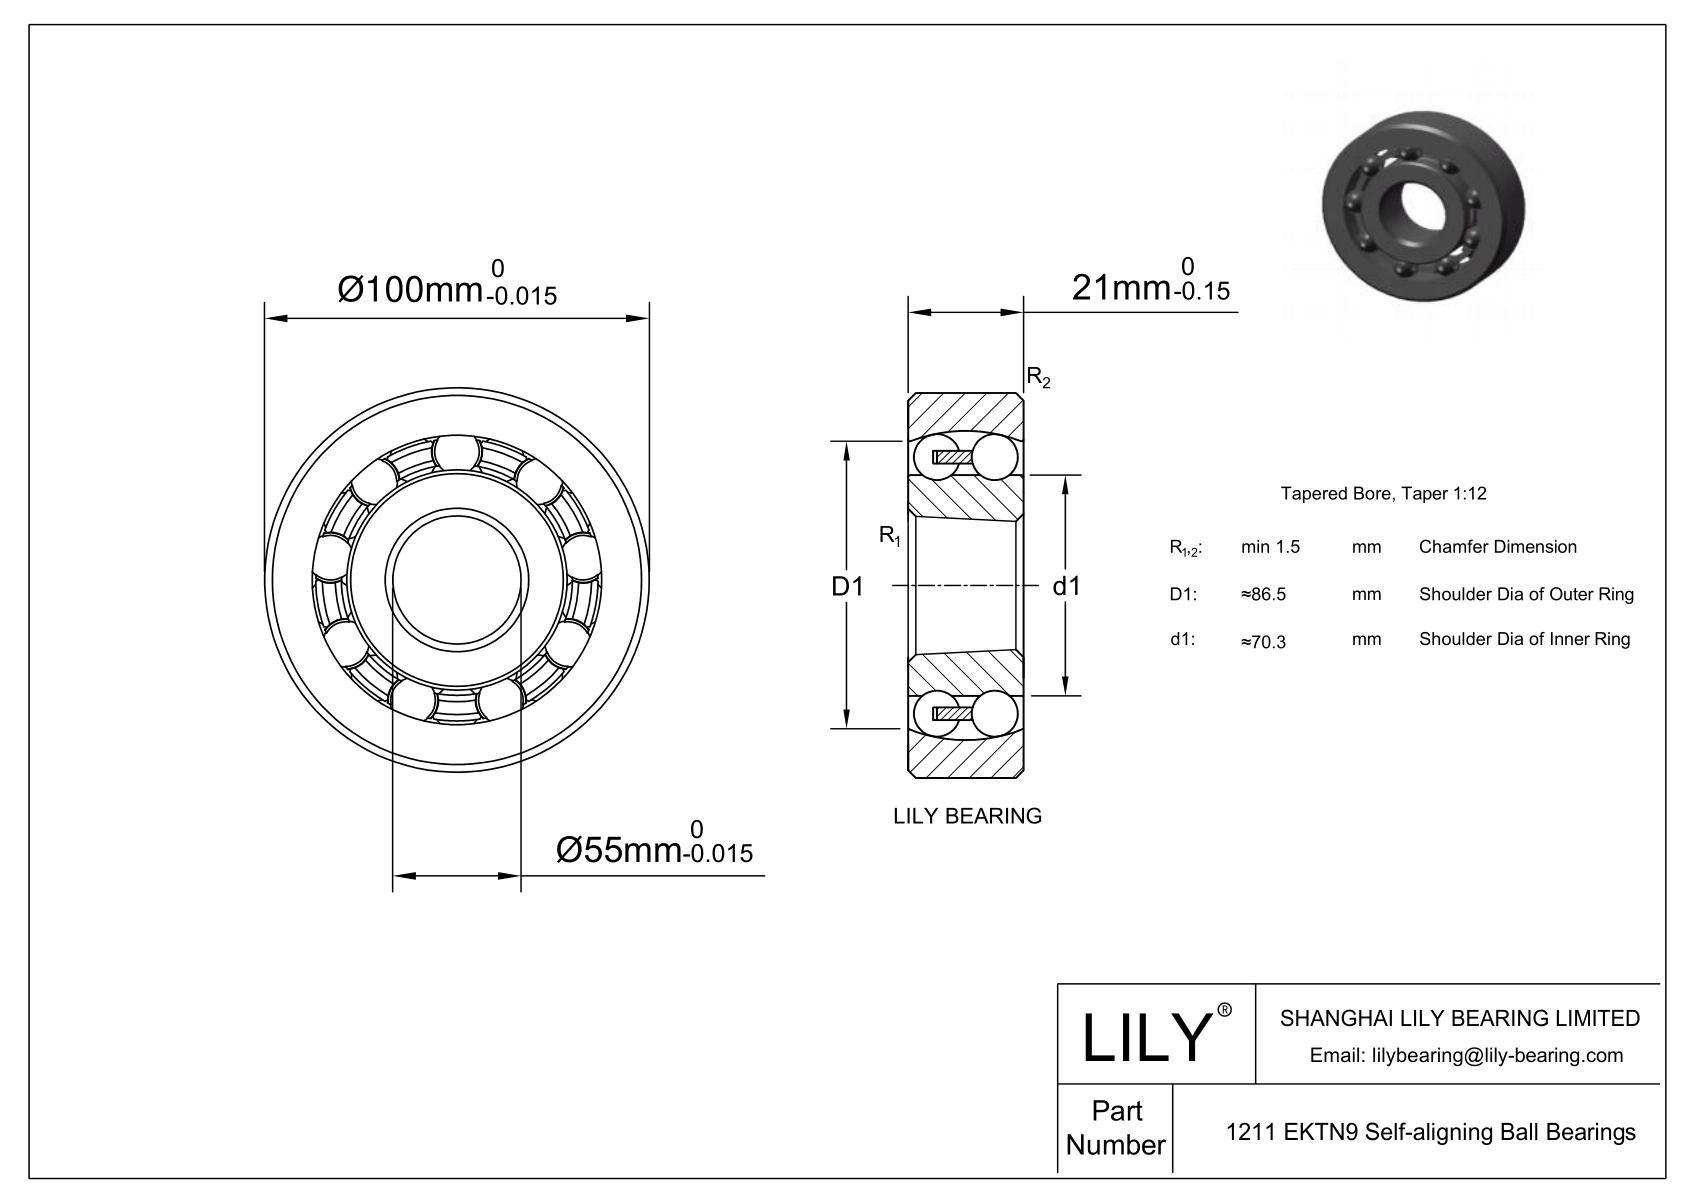 CE1211SC Silicon Carbide Self Aligning Ball Bearings cad drawing